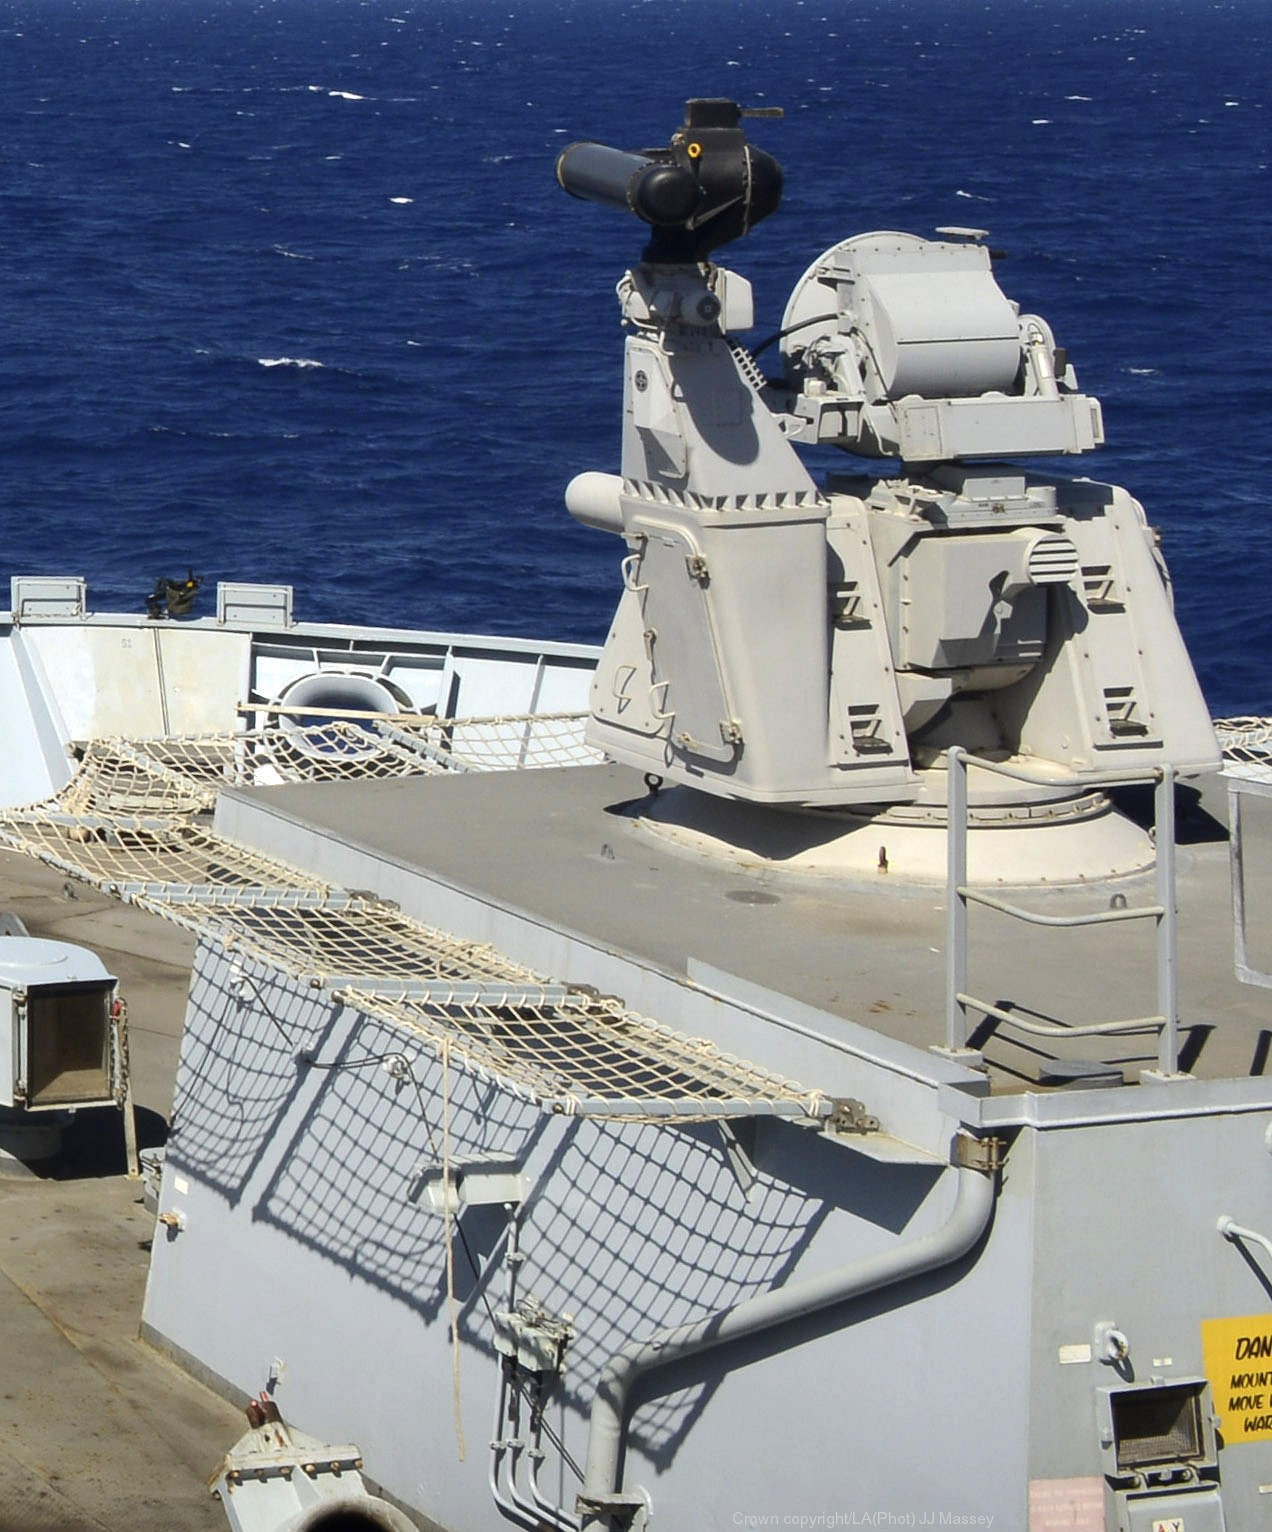 goalkeeper close-in weapon system ciws 30mm thales navy 04